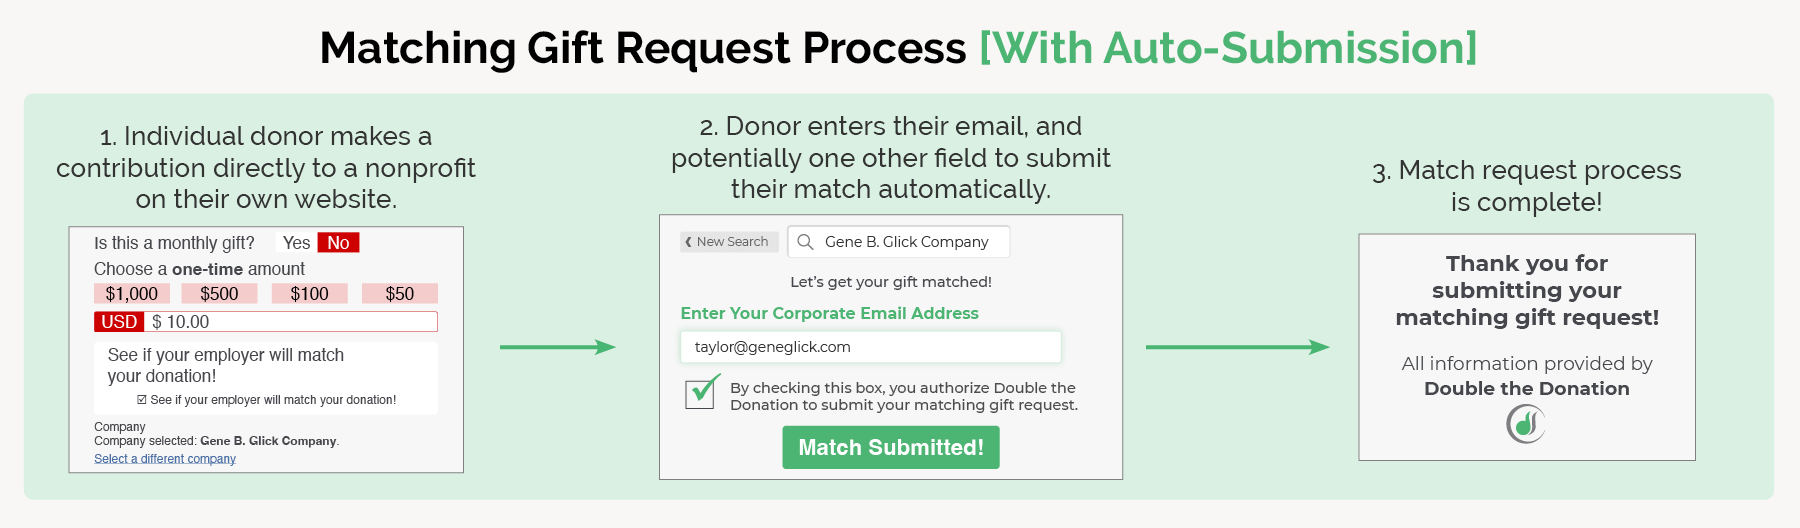 This graphic outlines the matching gift request process with auto-submission, showing how it improves workplace giving software’s functionality. 